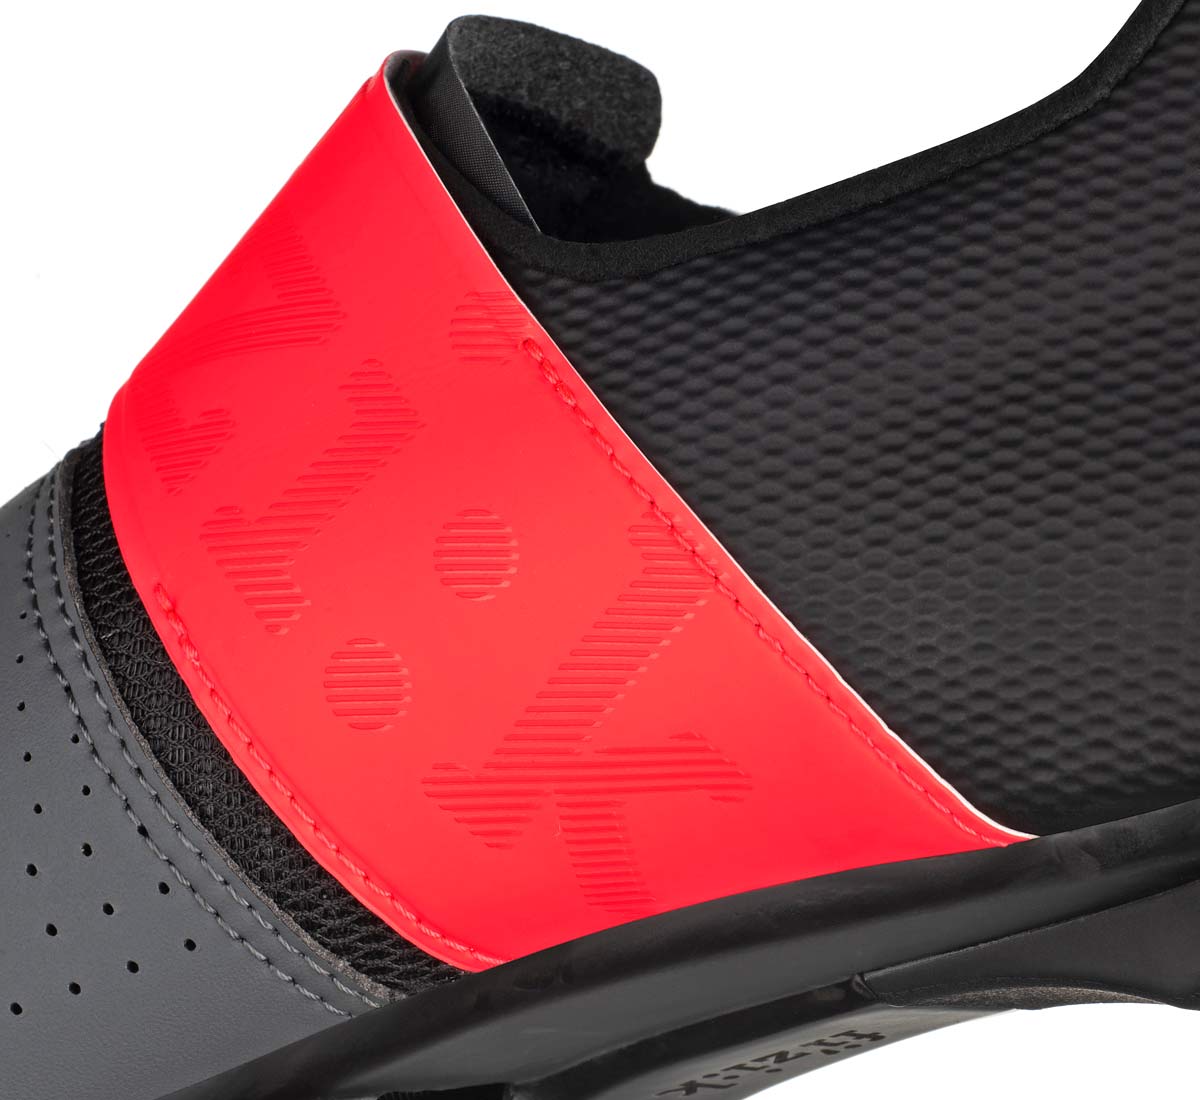 Fizik Vento Infinito Carbon 2 road shoes, lightweight breathable stiff, microtex or knit road racing shoes, instep detail